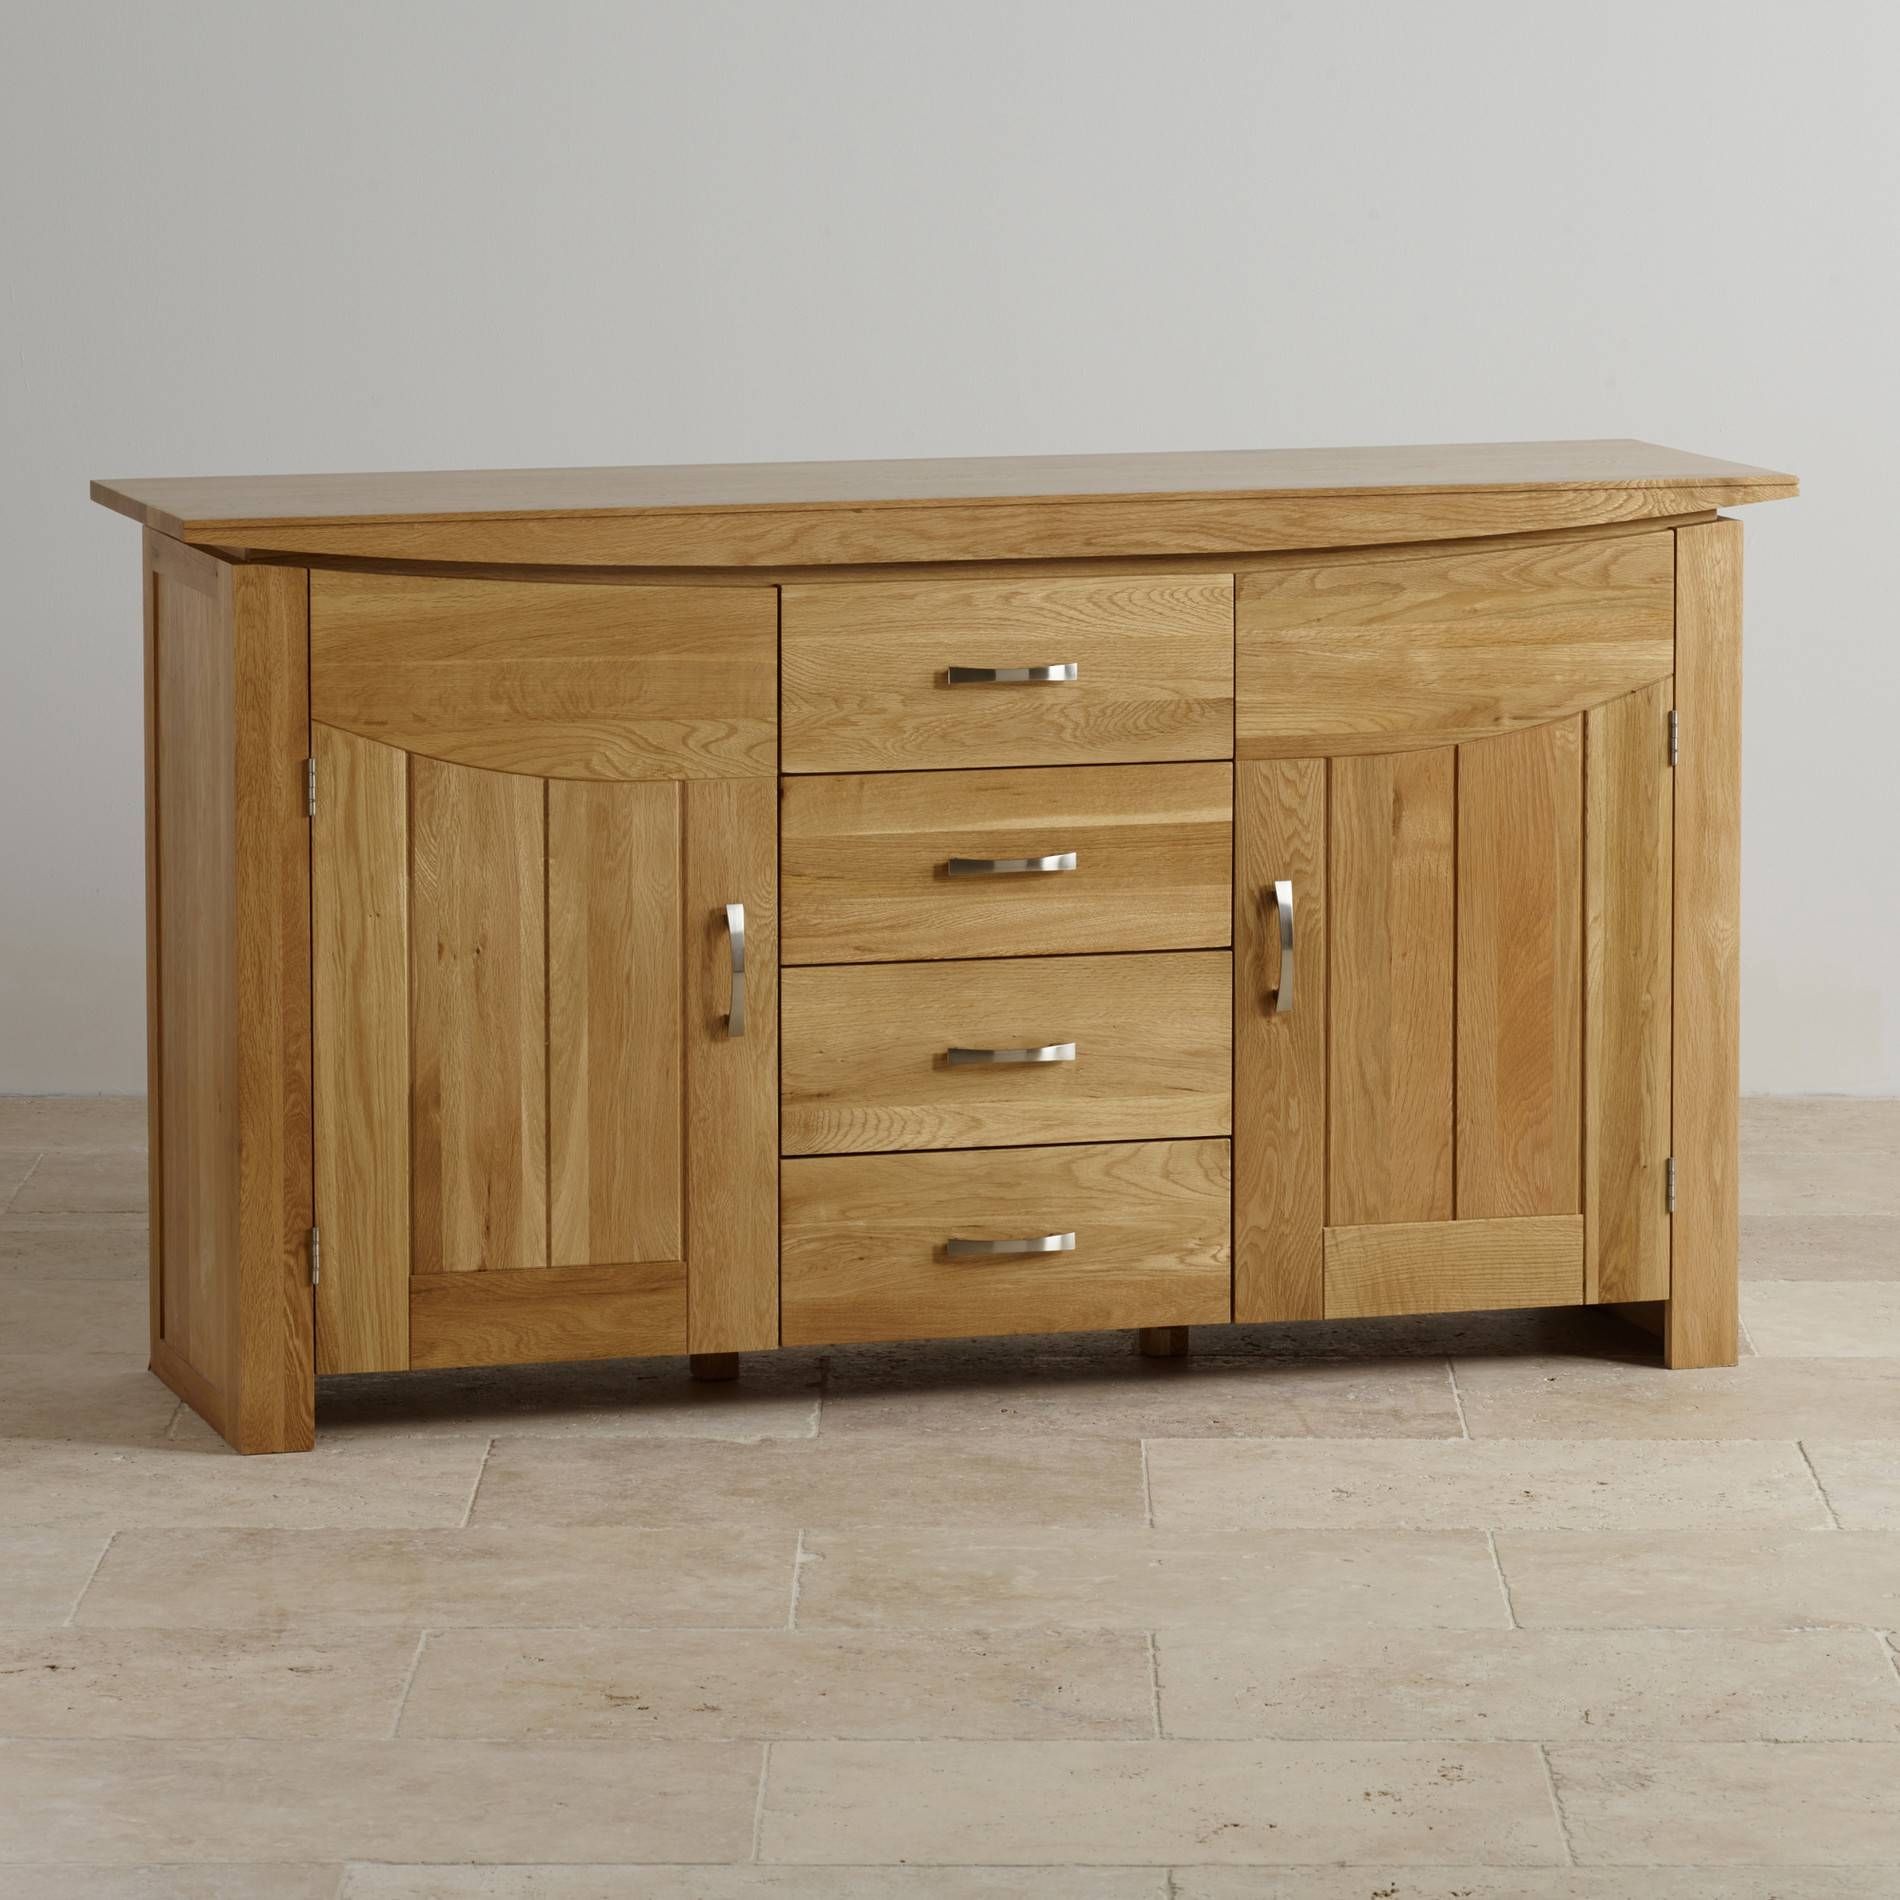 Give You Dining Rooms A New Look With Modern Sideboards Throughout Most Popular Extra Large Oak Sideboards (View 6 of 15)